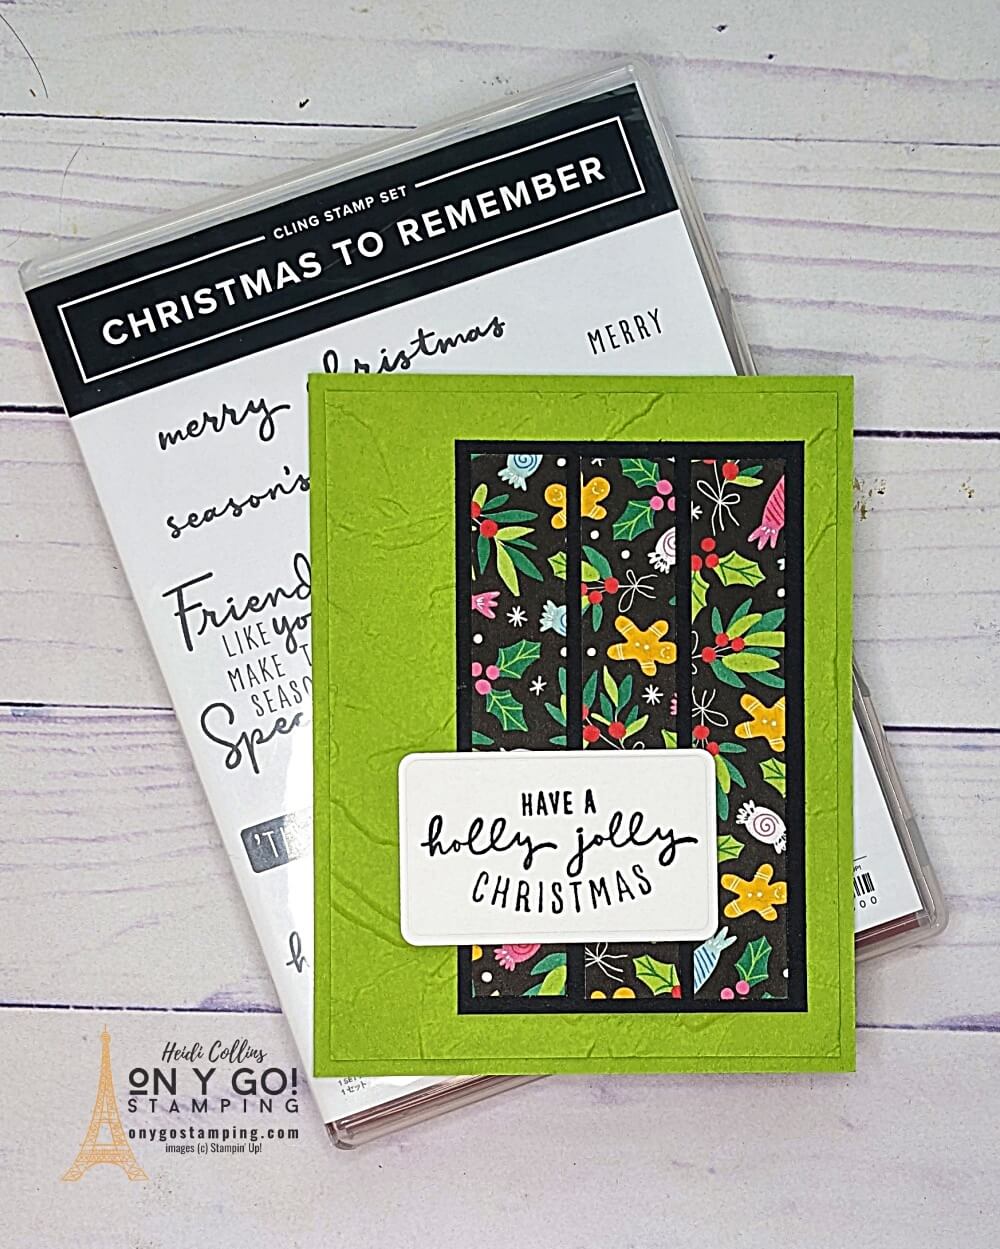 Ready to make your Christmas cards? Here's an easy card design for making quick cards with the Christmas to Remember stamp set and Celebrate Everything patterned paper from Stampin' Up!®